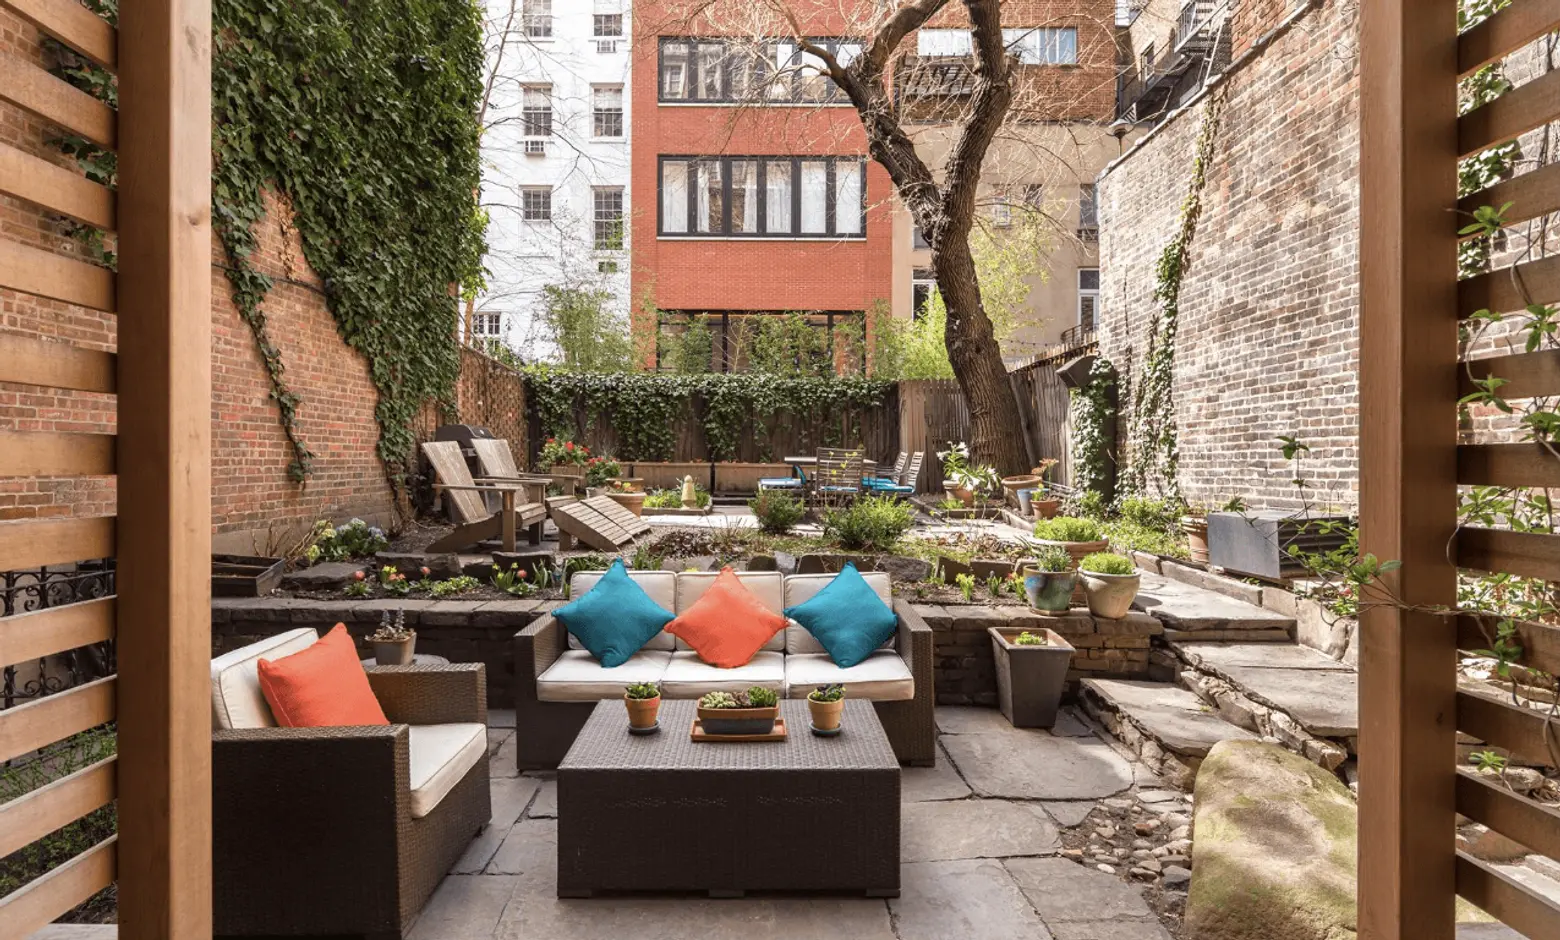 Gramercy maisonette with a gorgeous garden and wine cellar asks $3.2M